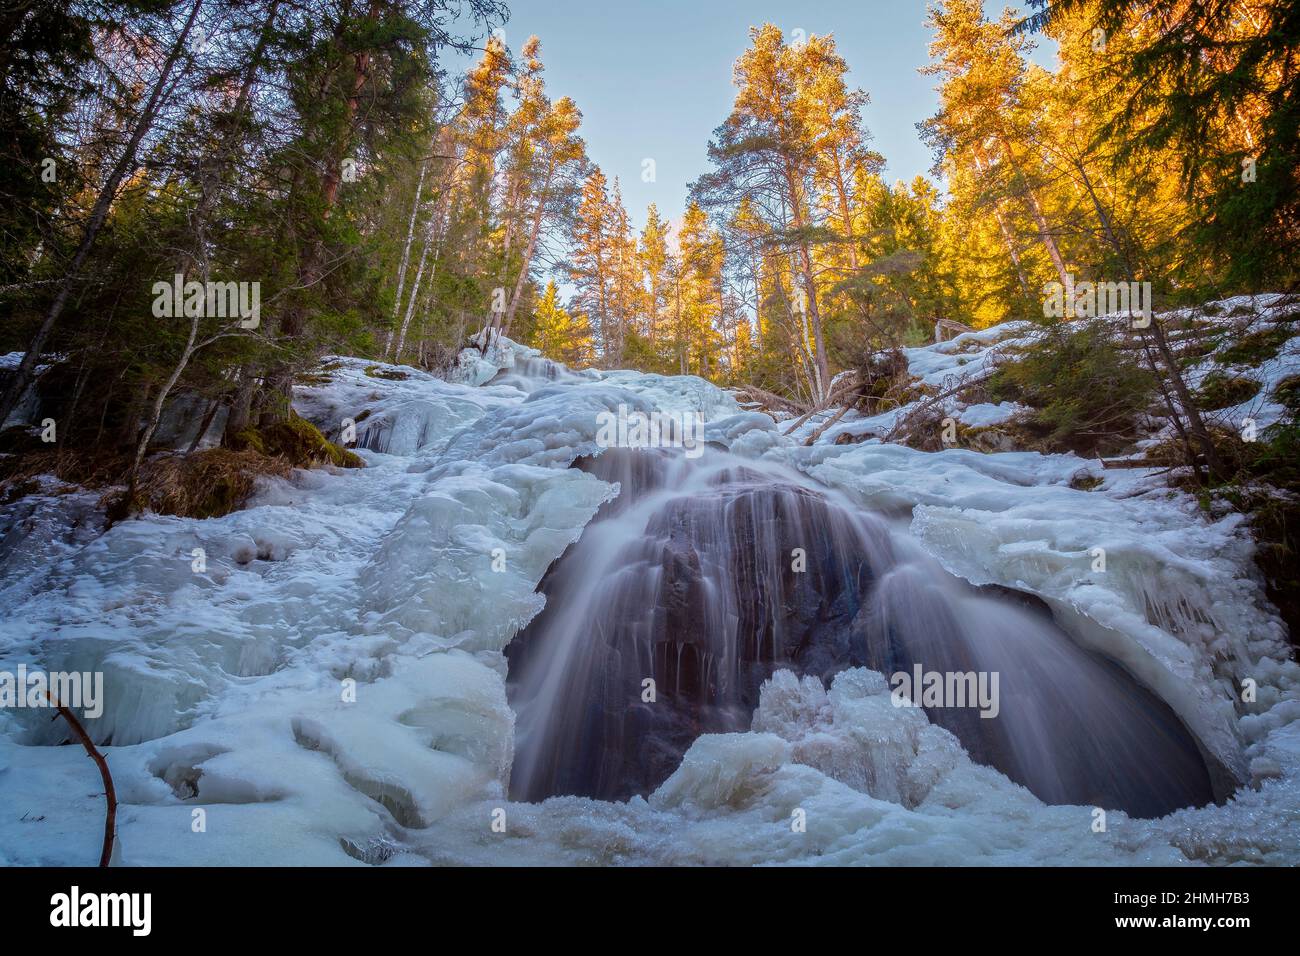 waterfall with ice and snow in a forest Stock Photo